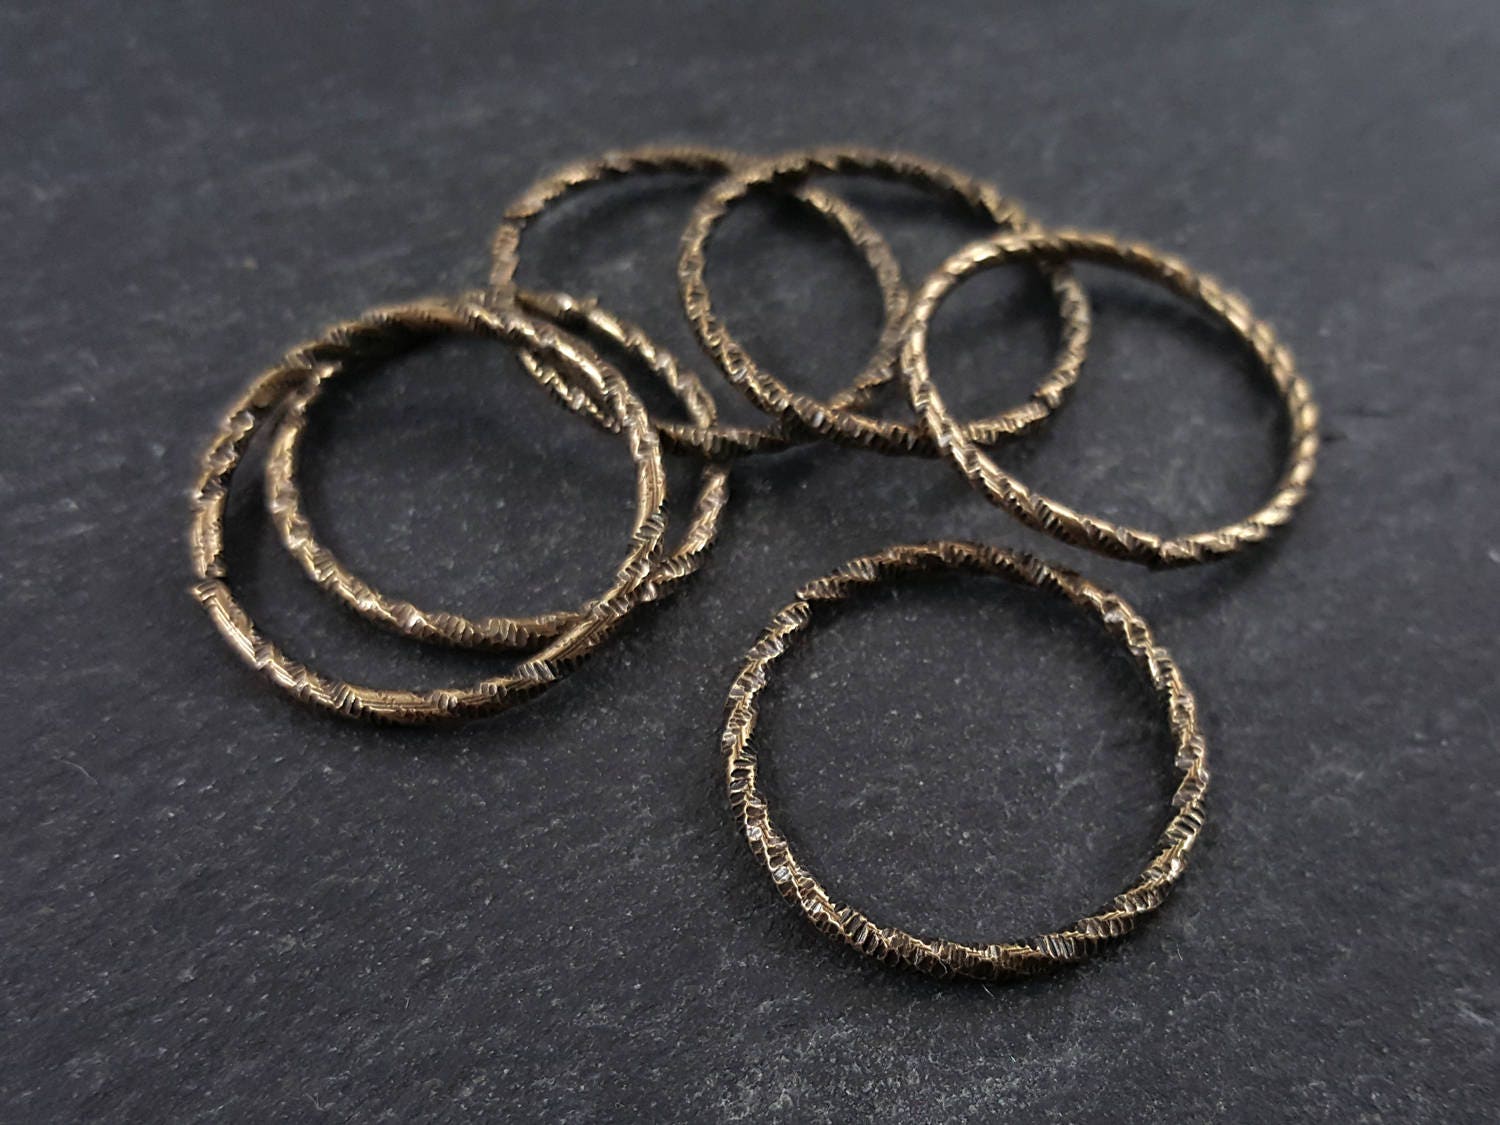 25mm Twisted Etched Jump Rings - Round Bronze Findings, Bronze Supplies, Link, Ring, Loop - Antique Bronze Plated 6pcs